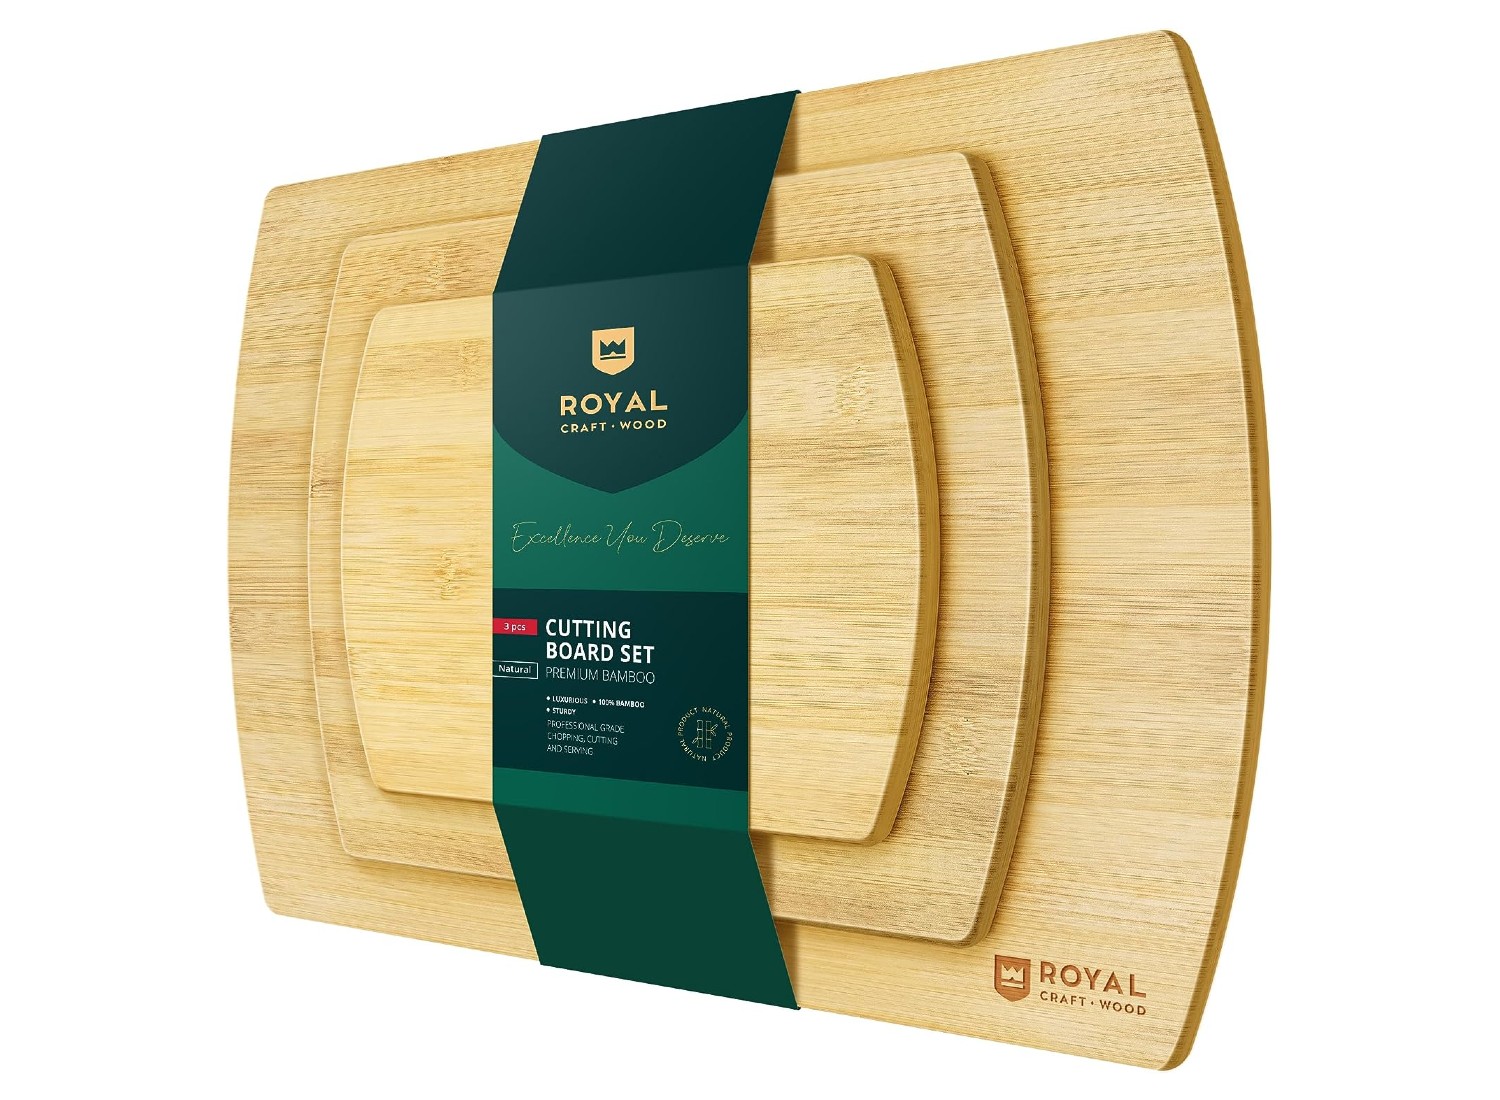 GREENER CHEF Extra Large Bamboo Cutting Board - Lifetime